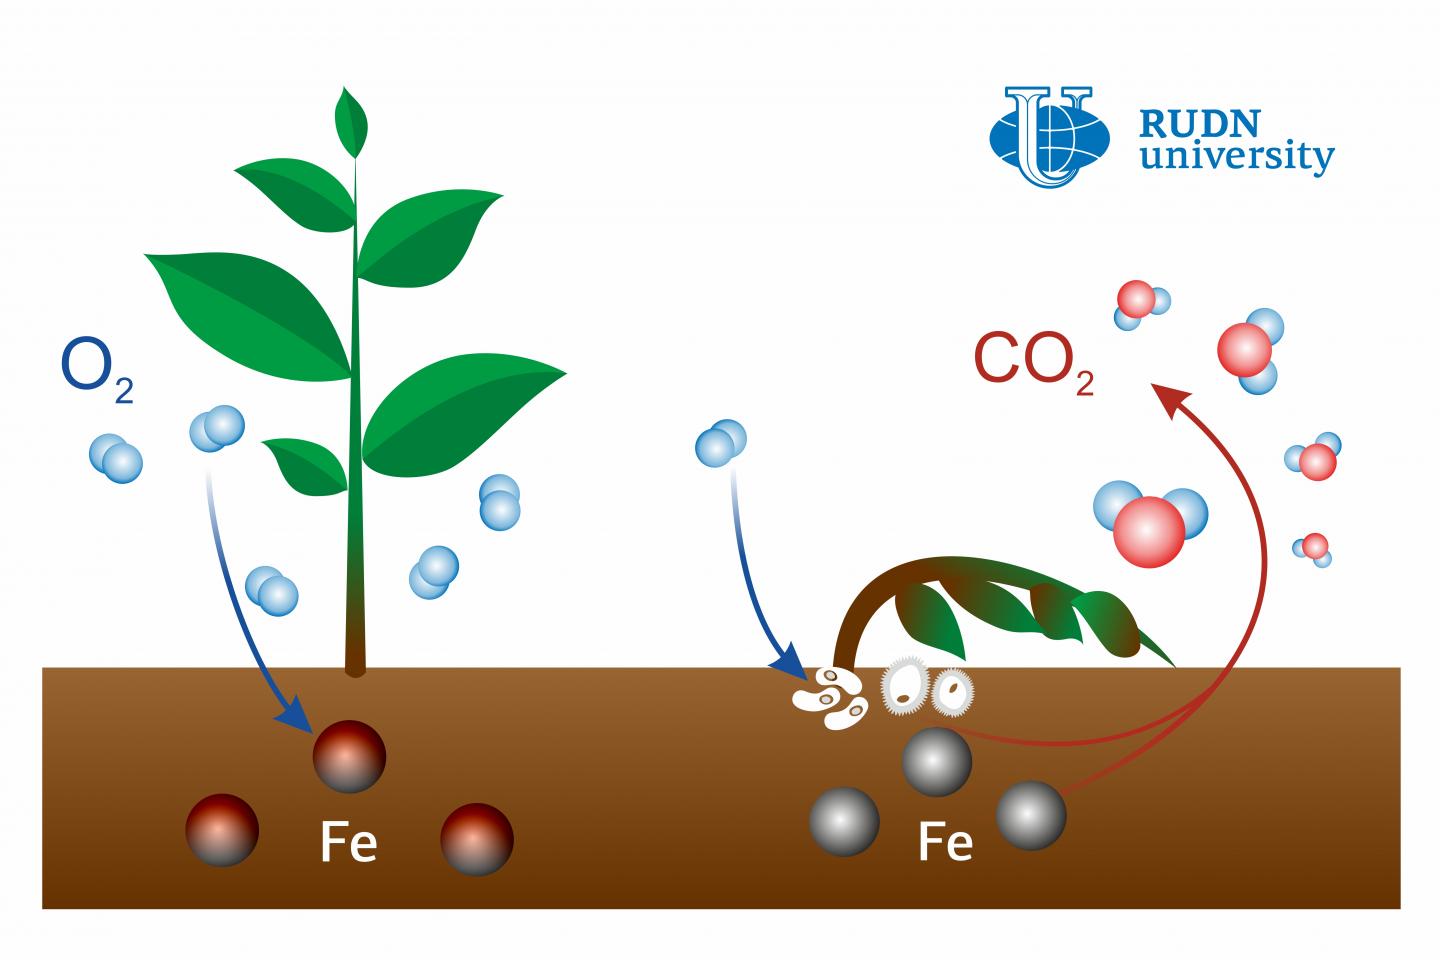 Iron Is to Blame for Carbon Dioxide Emissions from the Soil, Says a Soil Scientists from RUDN University